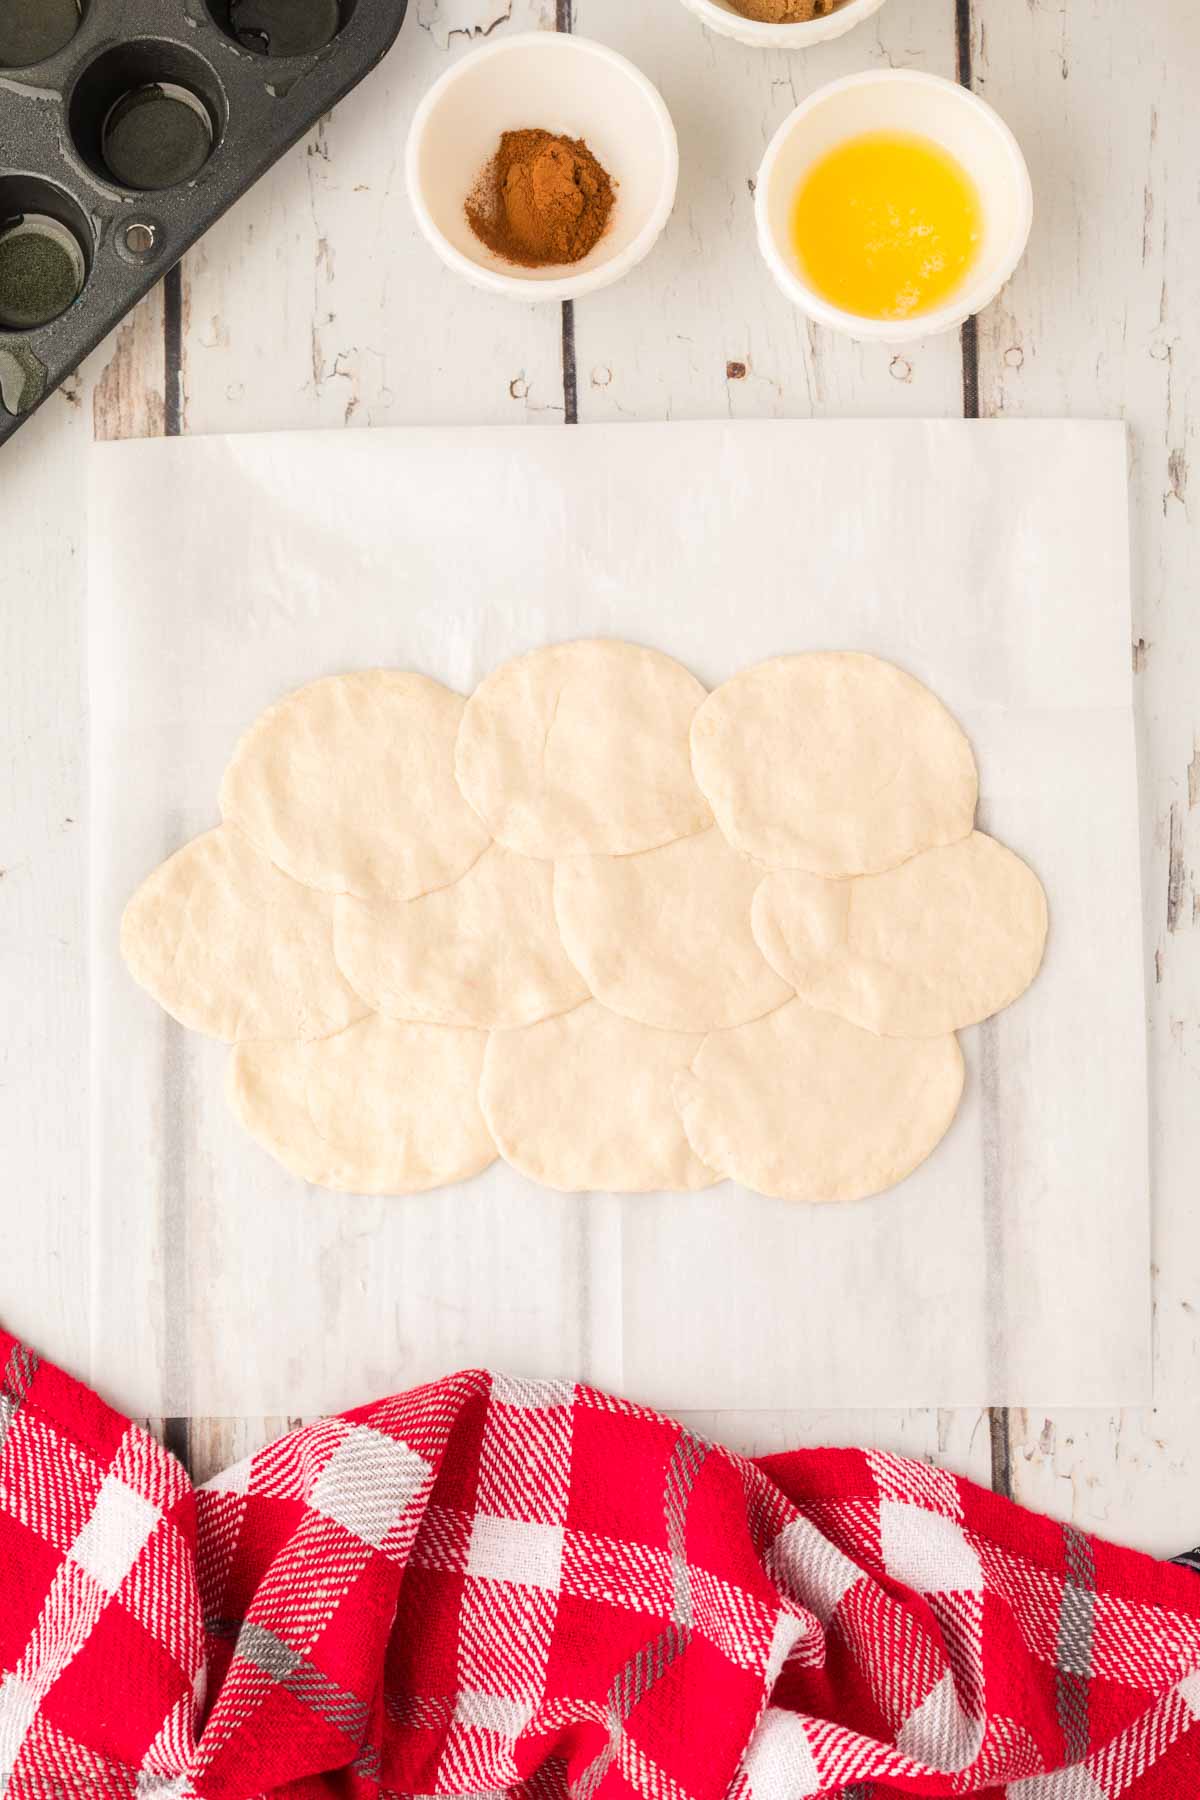 Pressing the biscuits flat on parchment paper